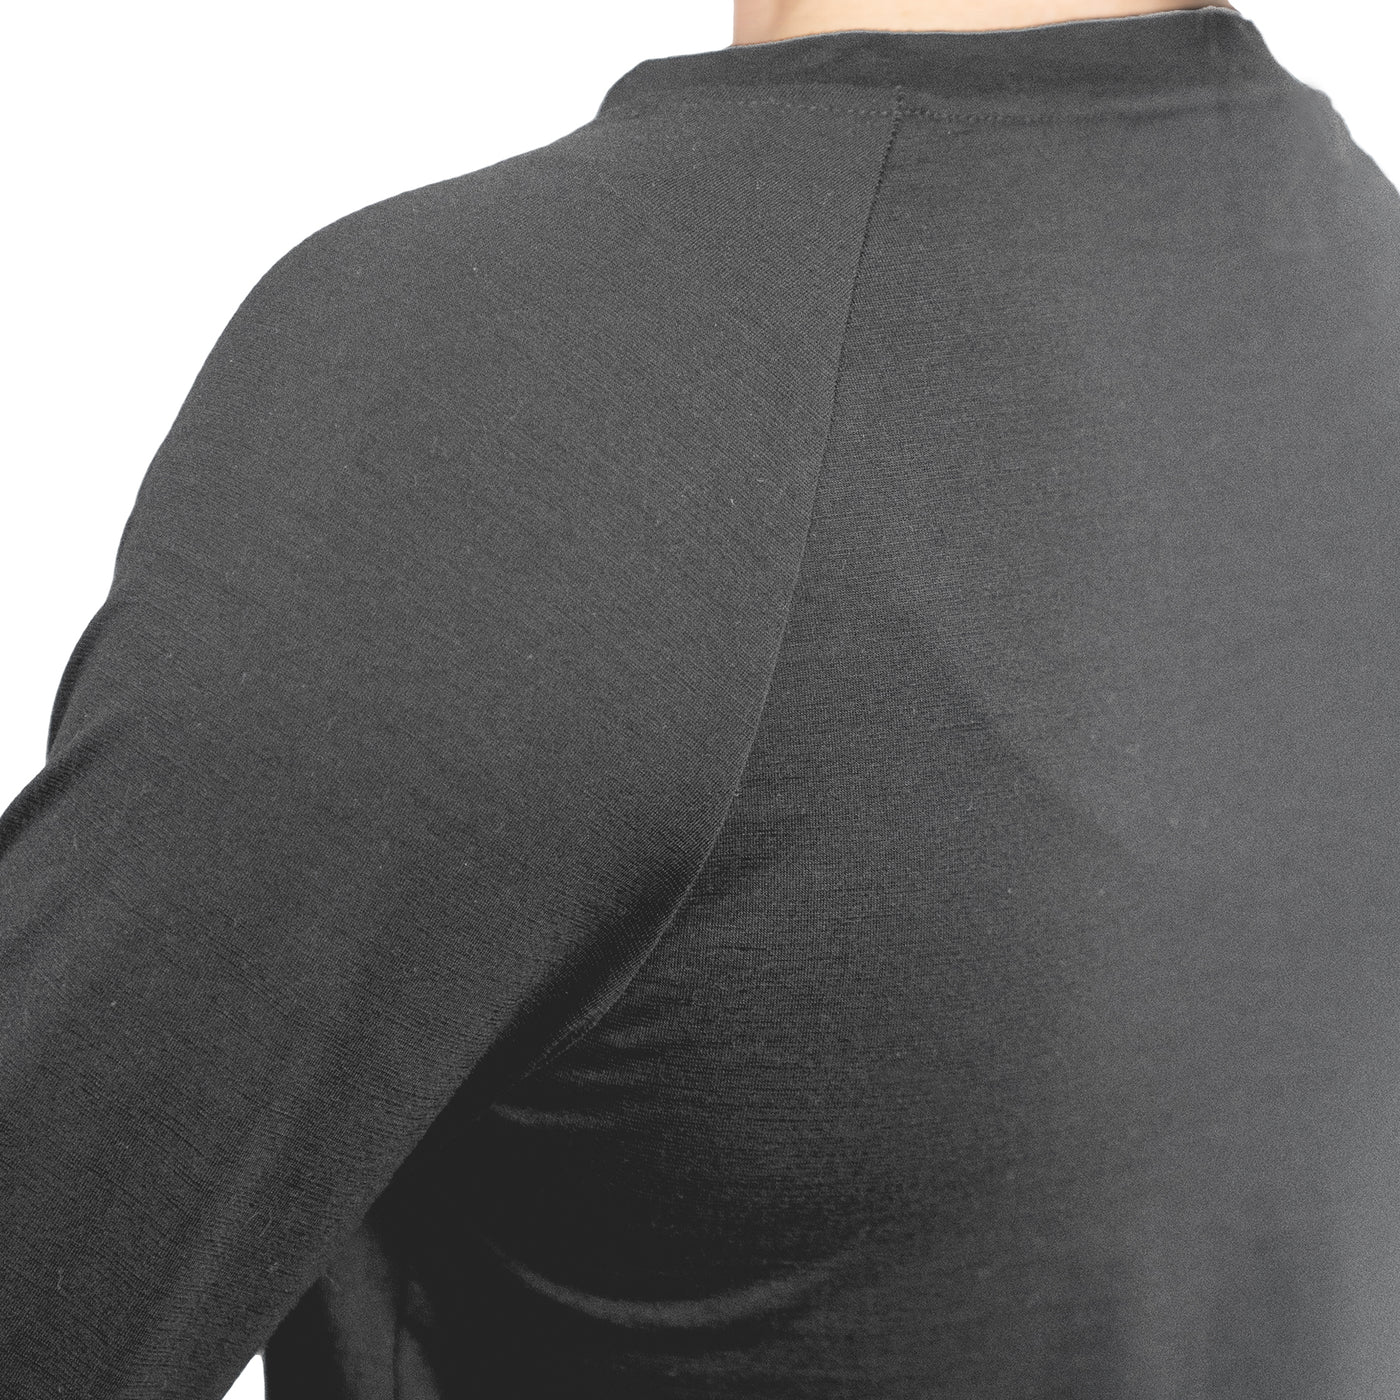 Shoulder shot of Ottie Merino wool thermal top in Charcoal Marle colour